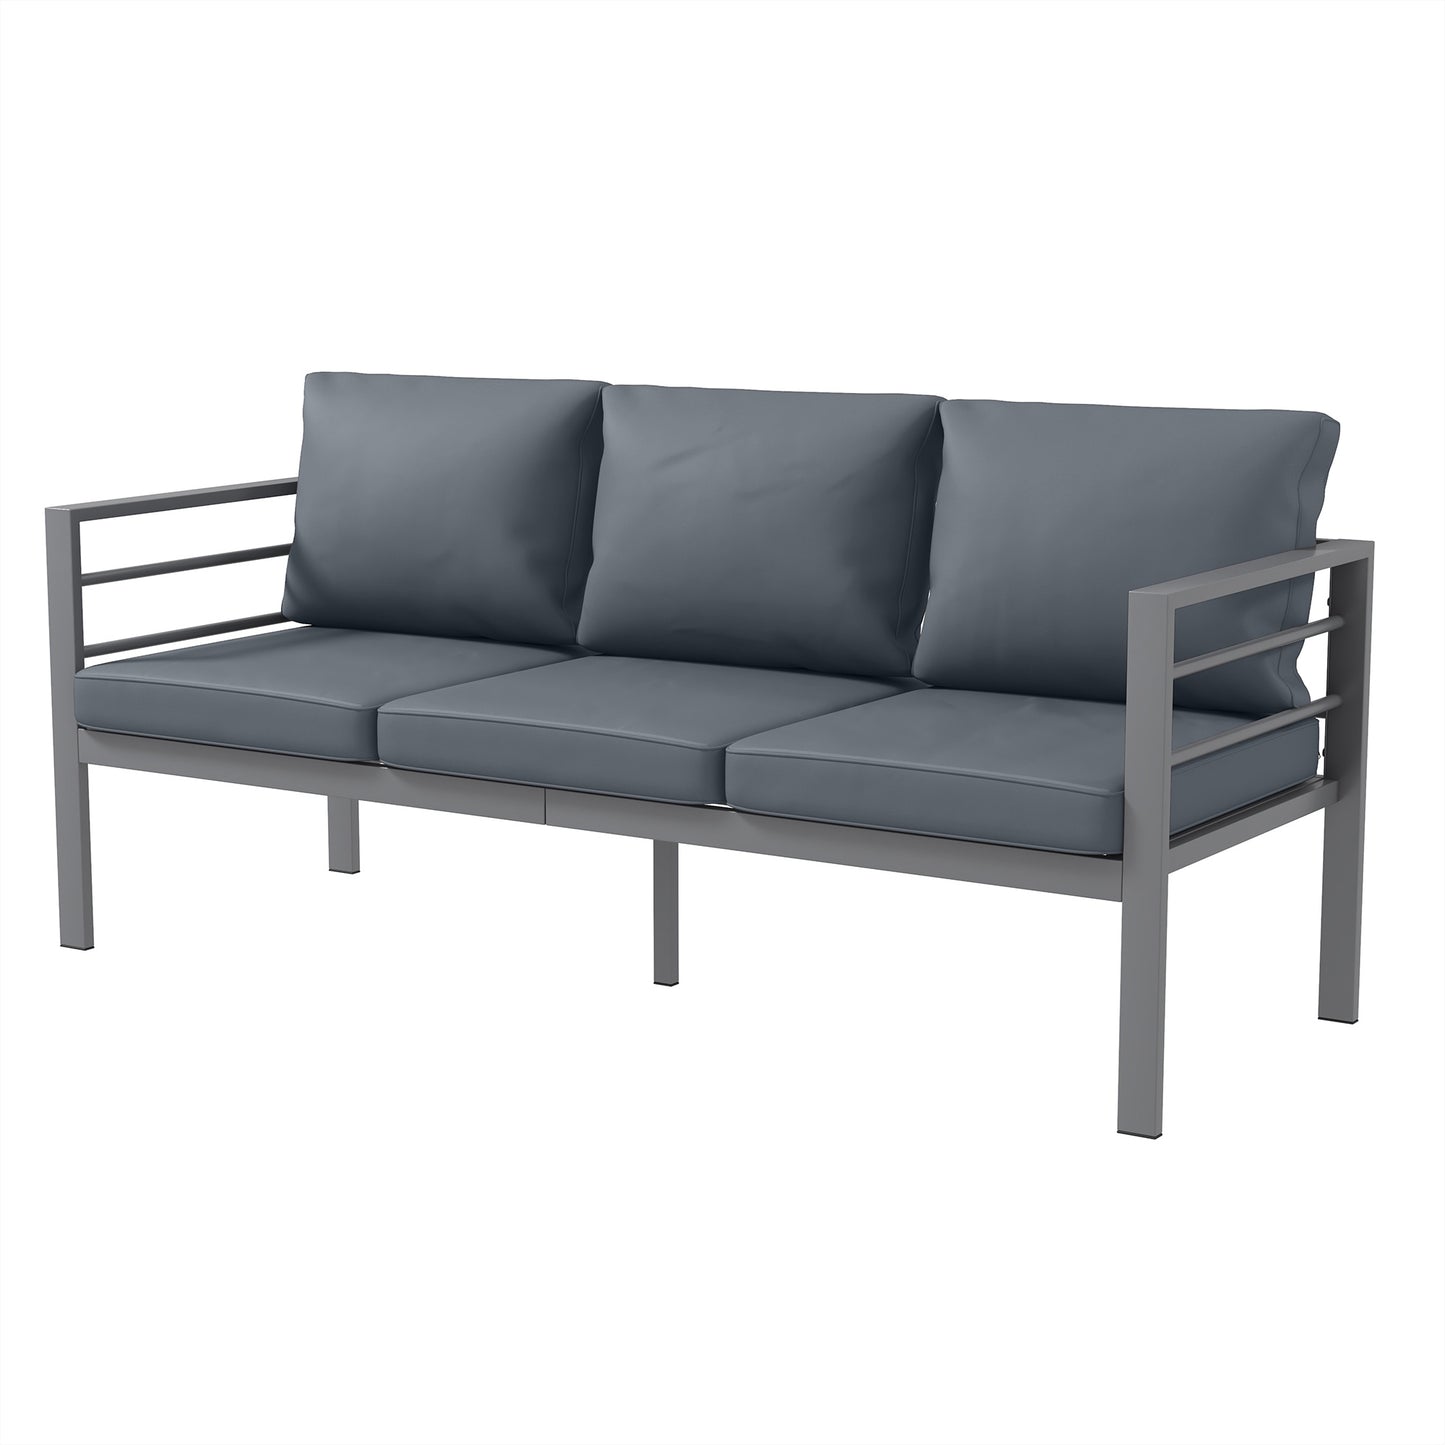 Outsunny Aluminum Garden Sofa, 3-Person Outdoor Couch, Backyard Furniture for 3-person with Cushions, 72.8" x 26" x 25.2", Grey